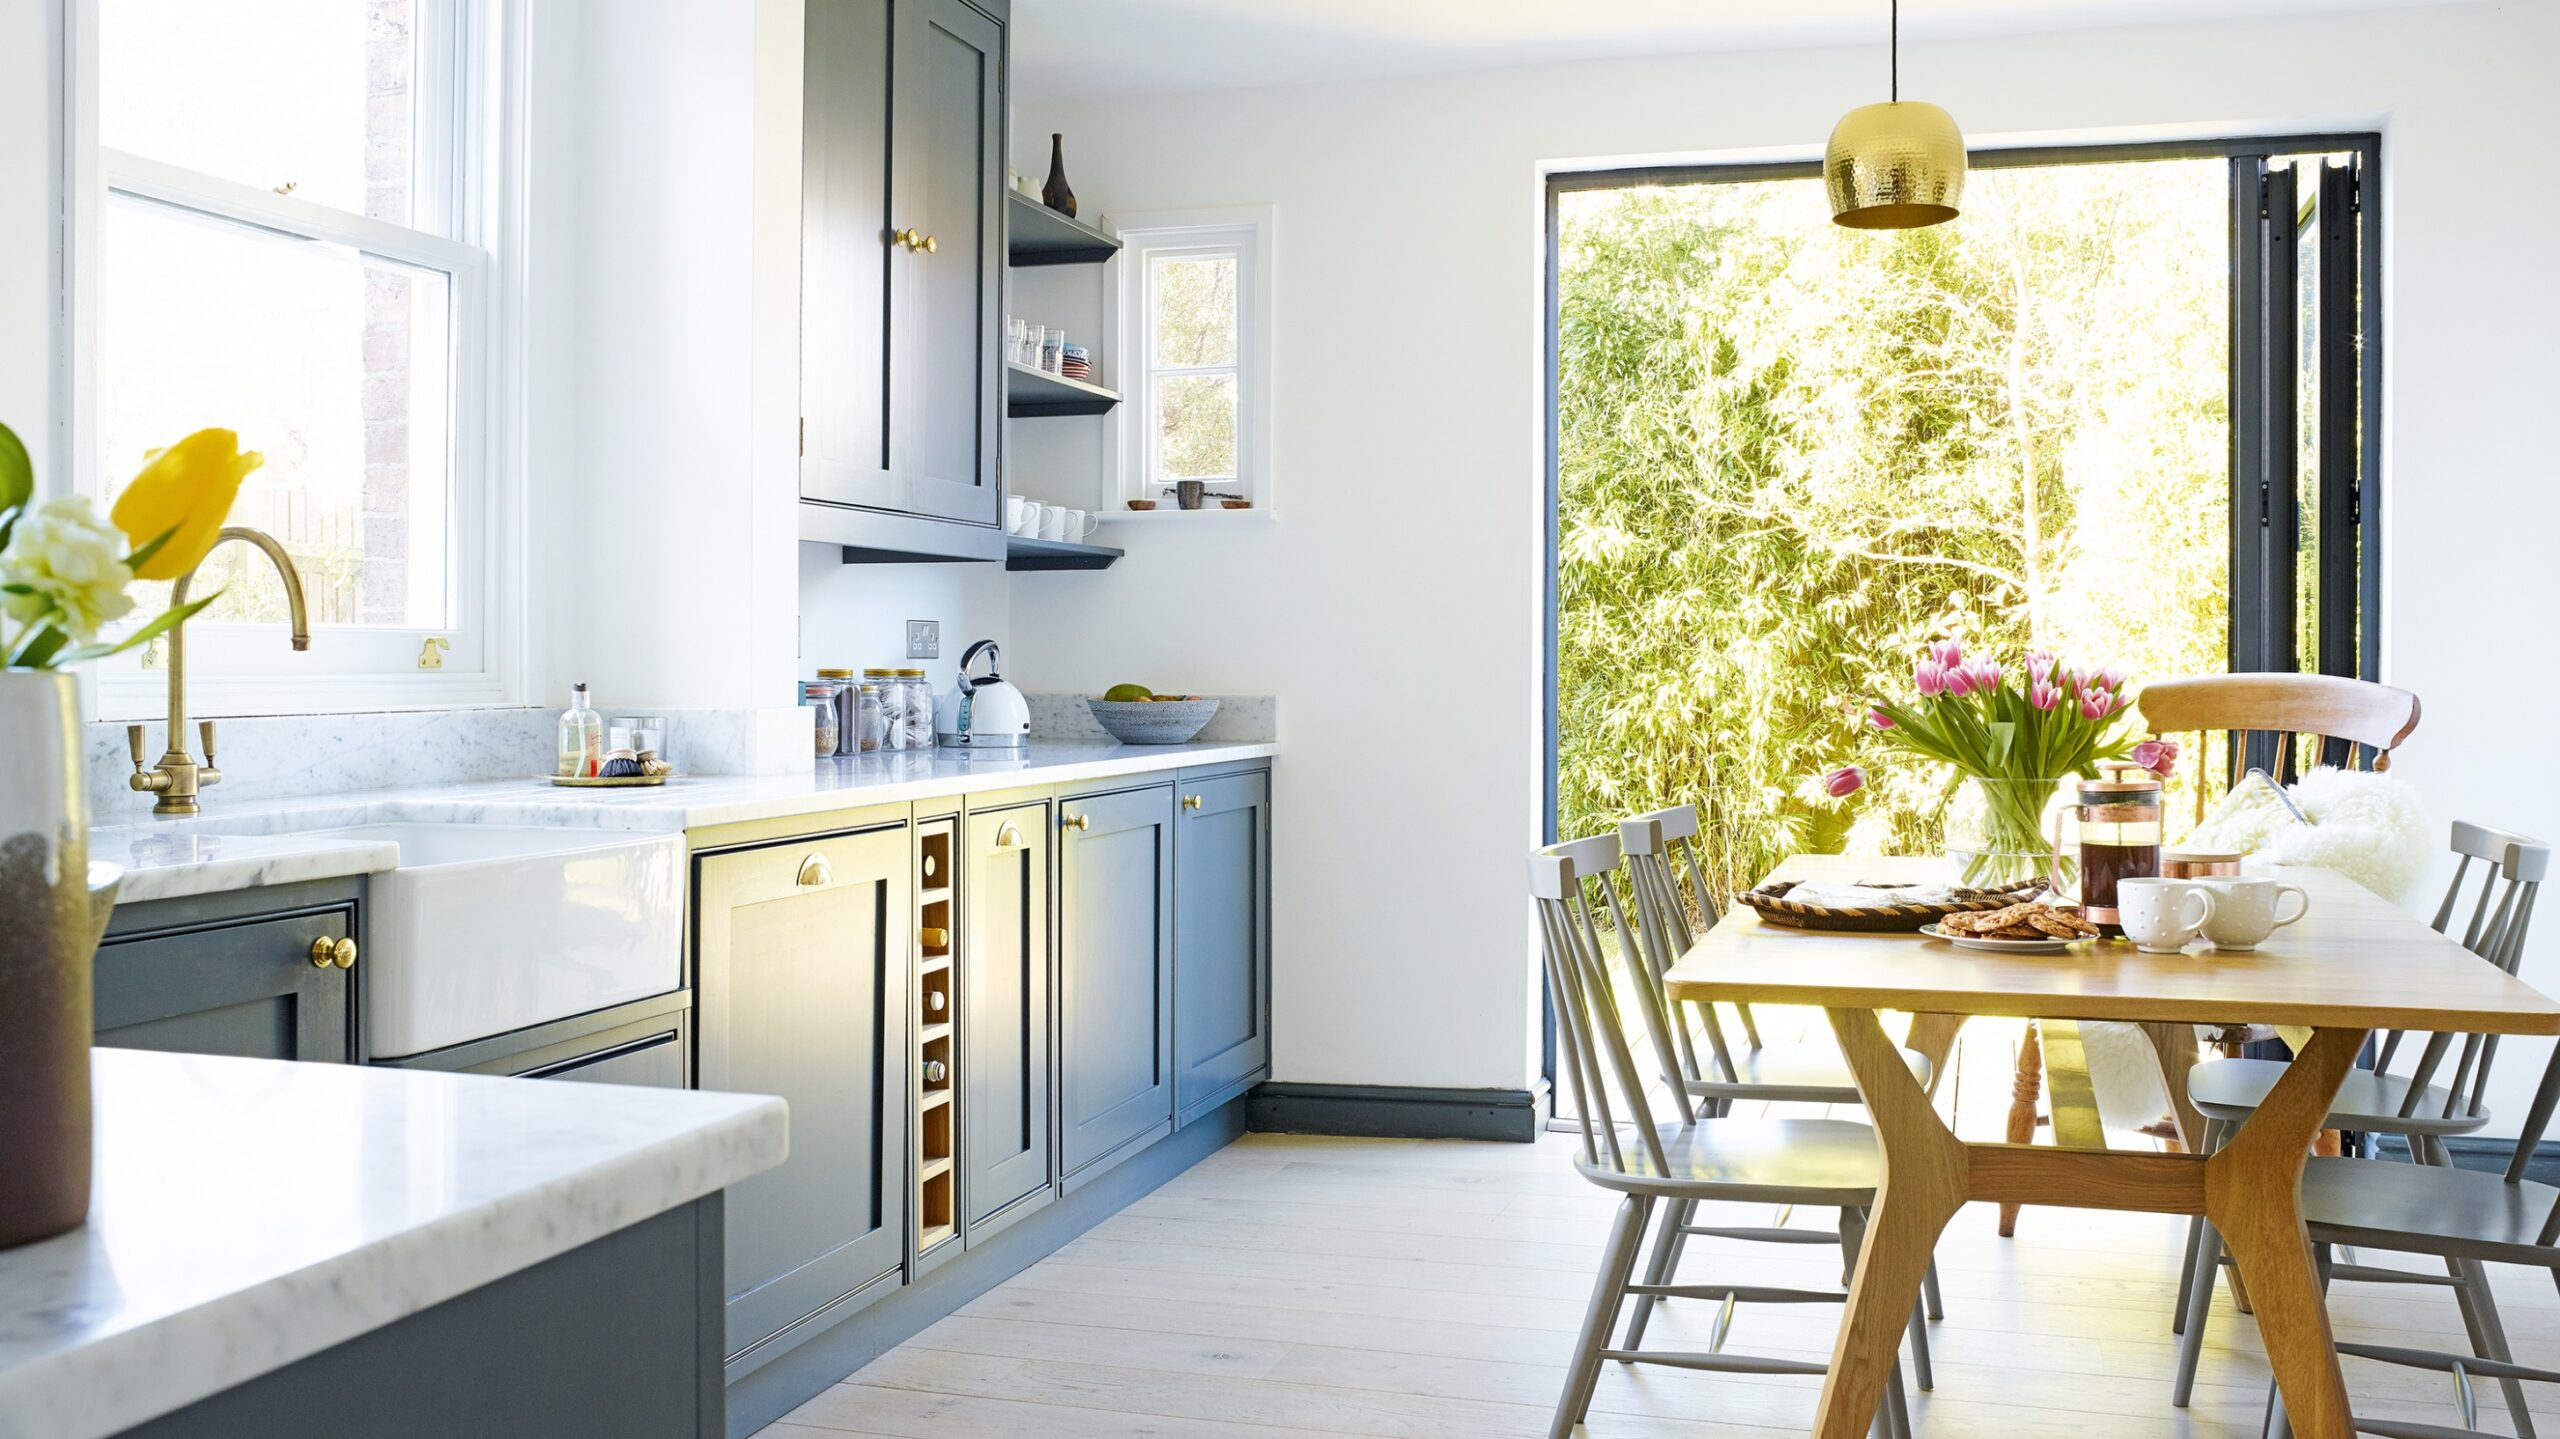 How to make a small kitchen look bigger – 10 expert tips and  - how do you make a small kitchen look bigger?